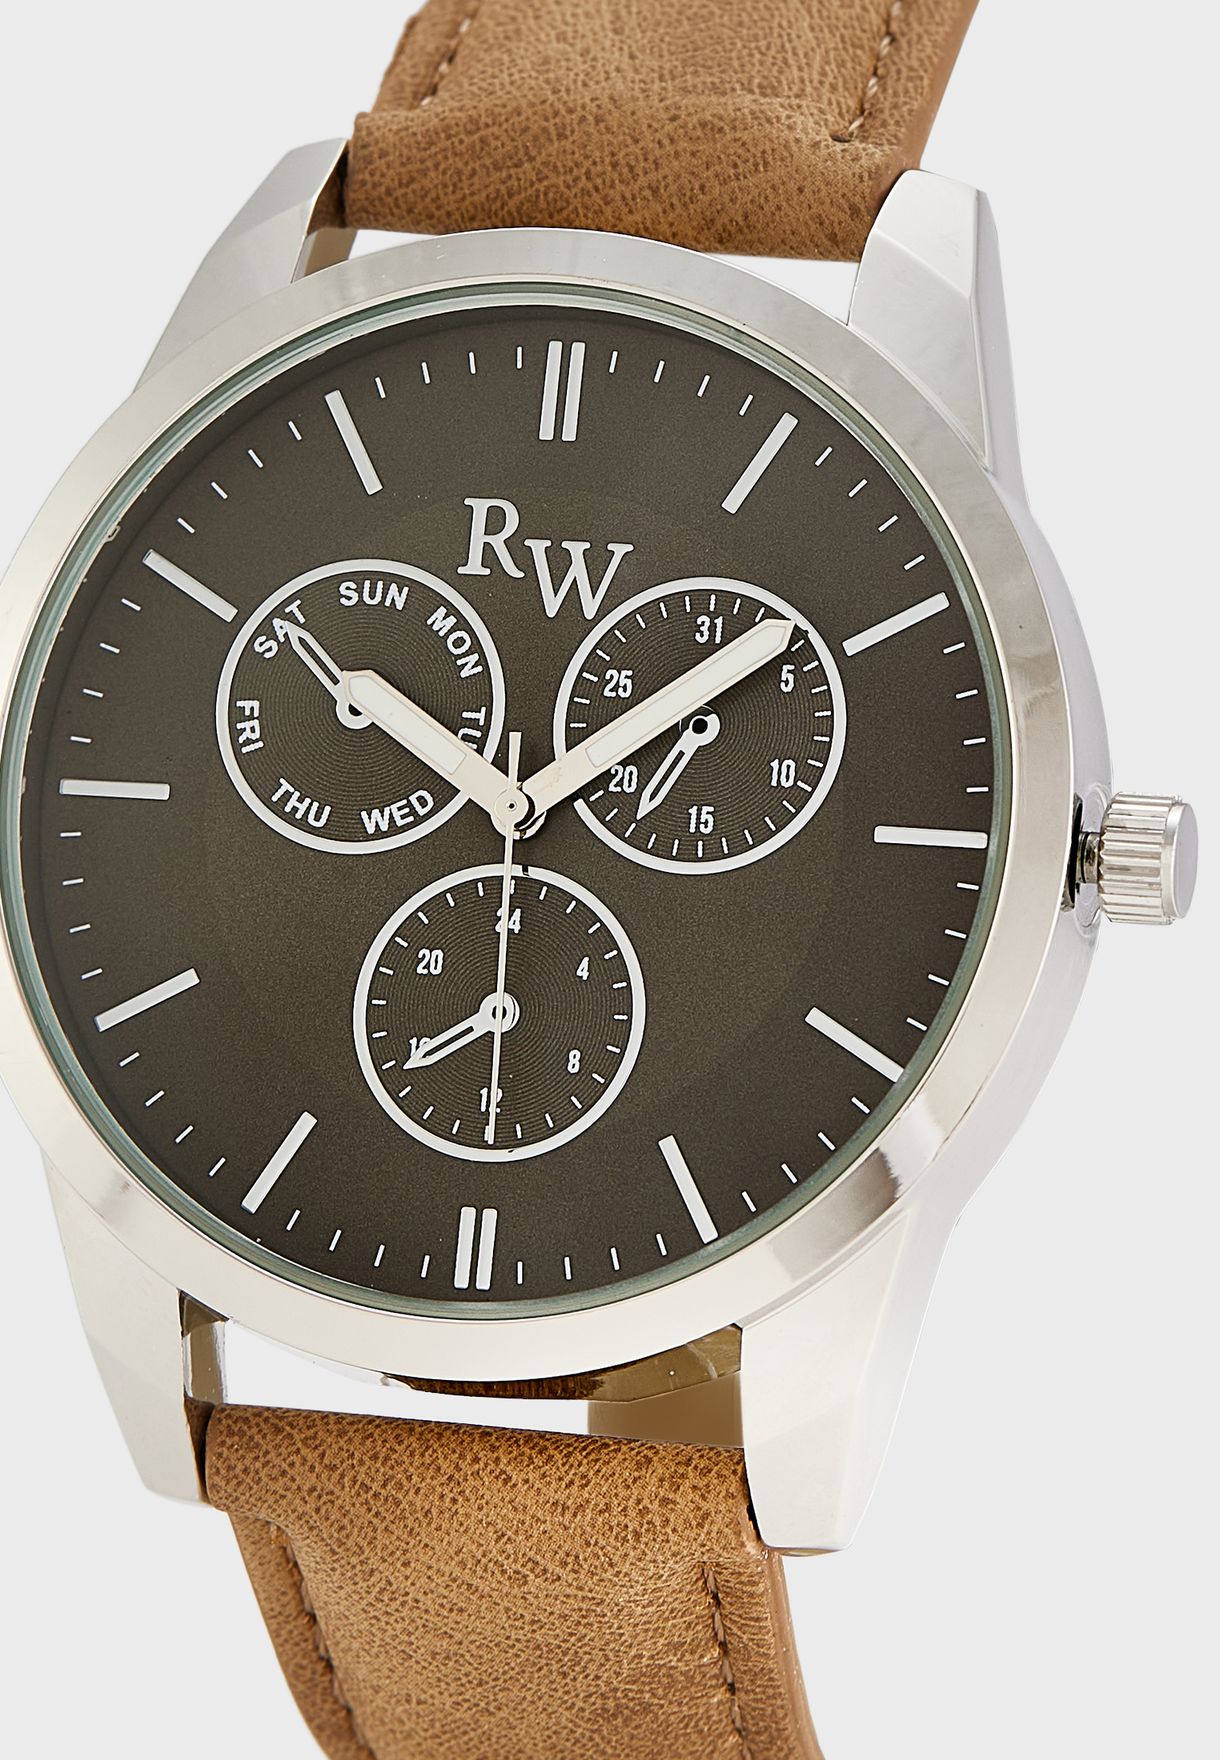 Analogue Watch With Subdials